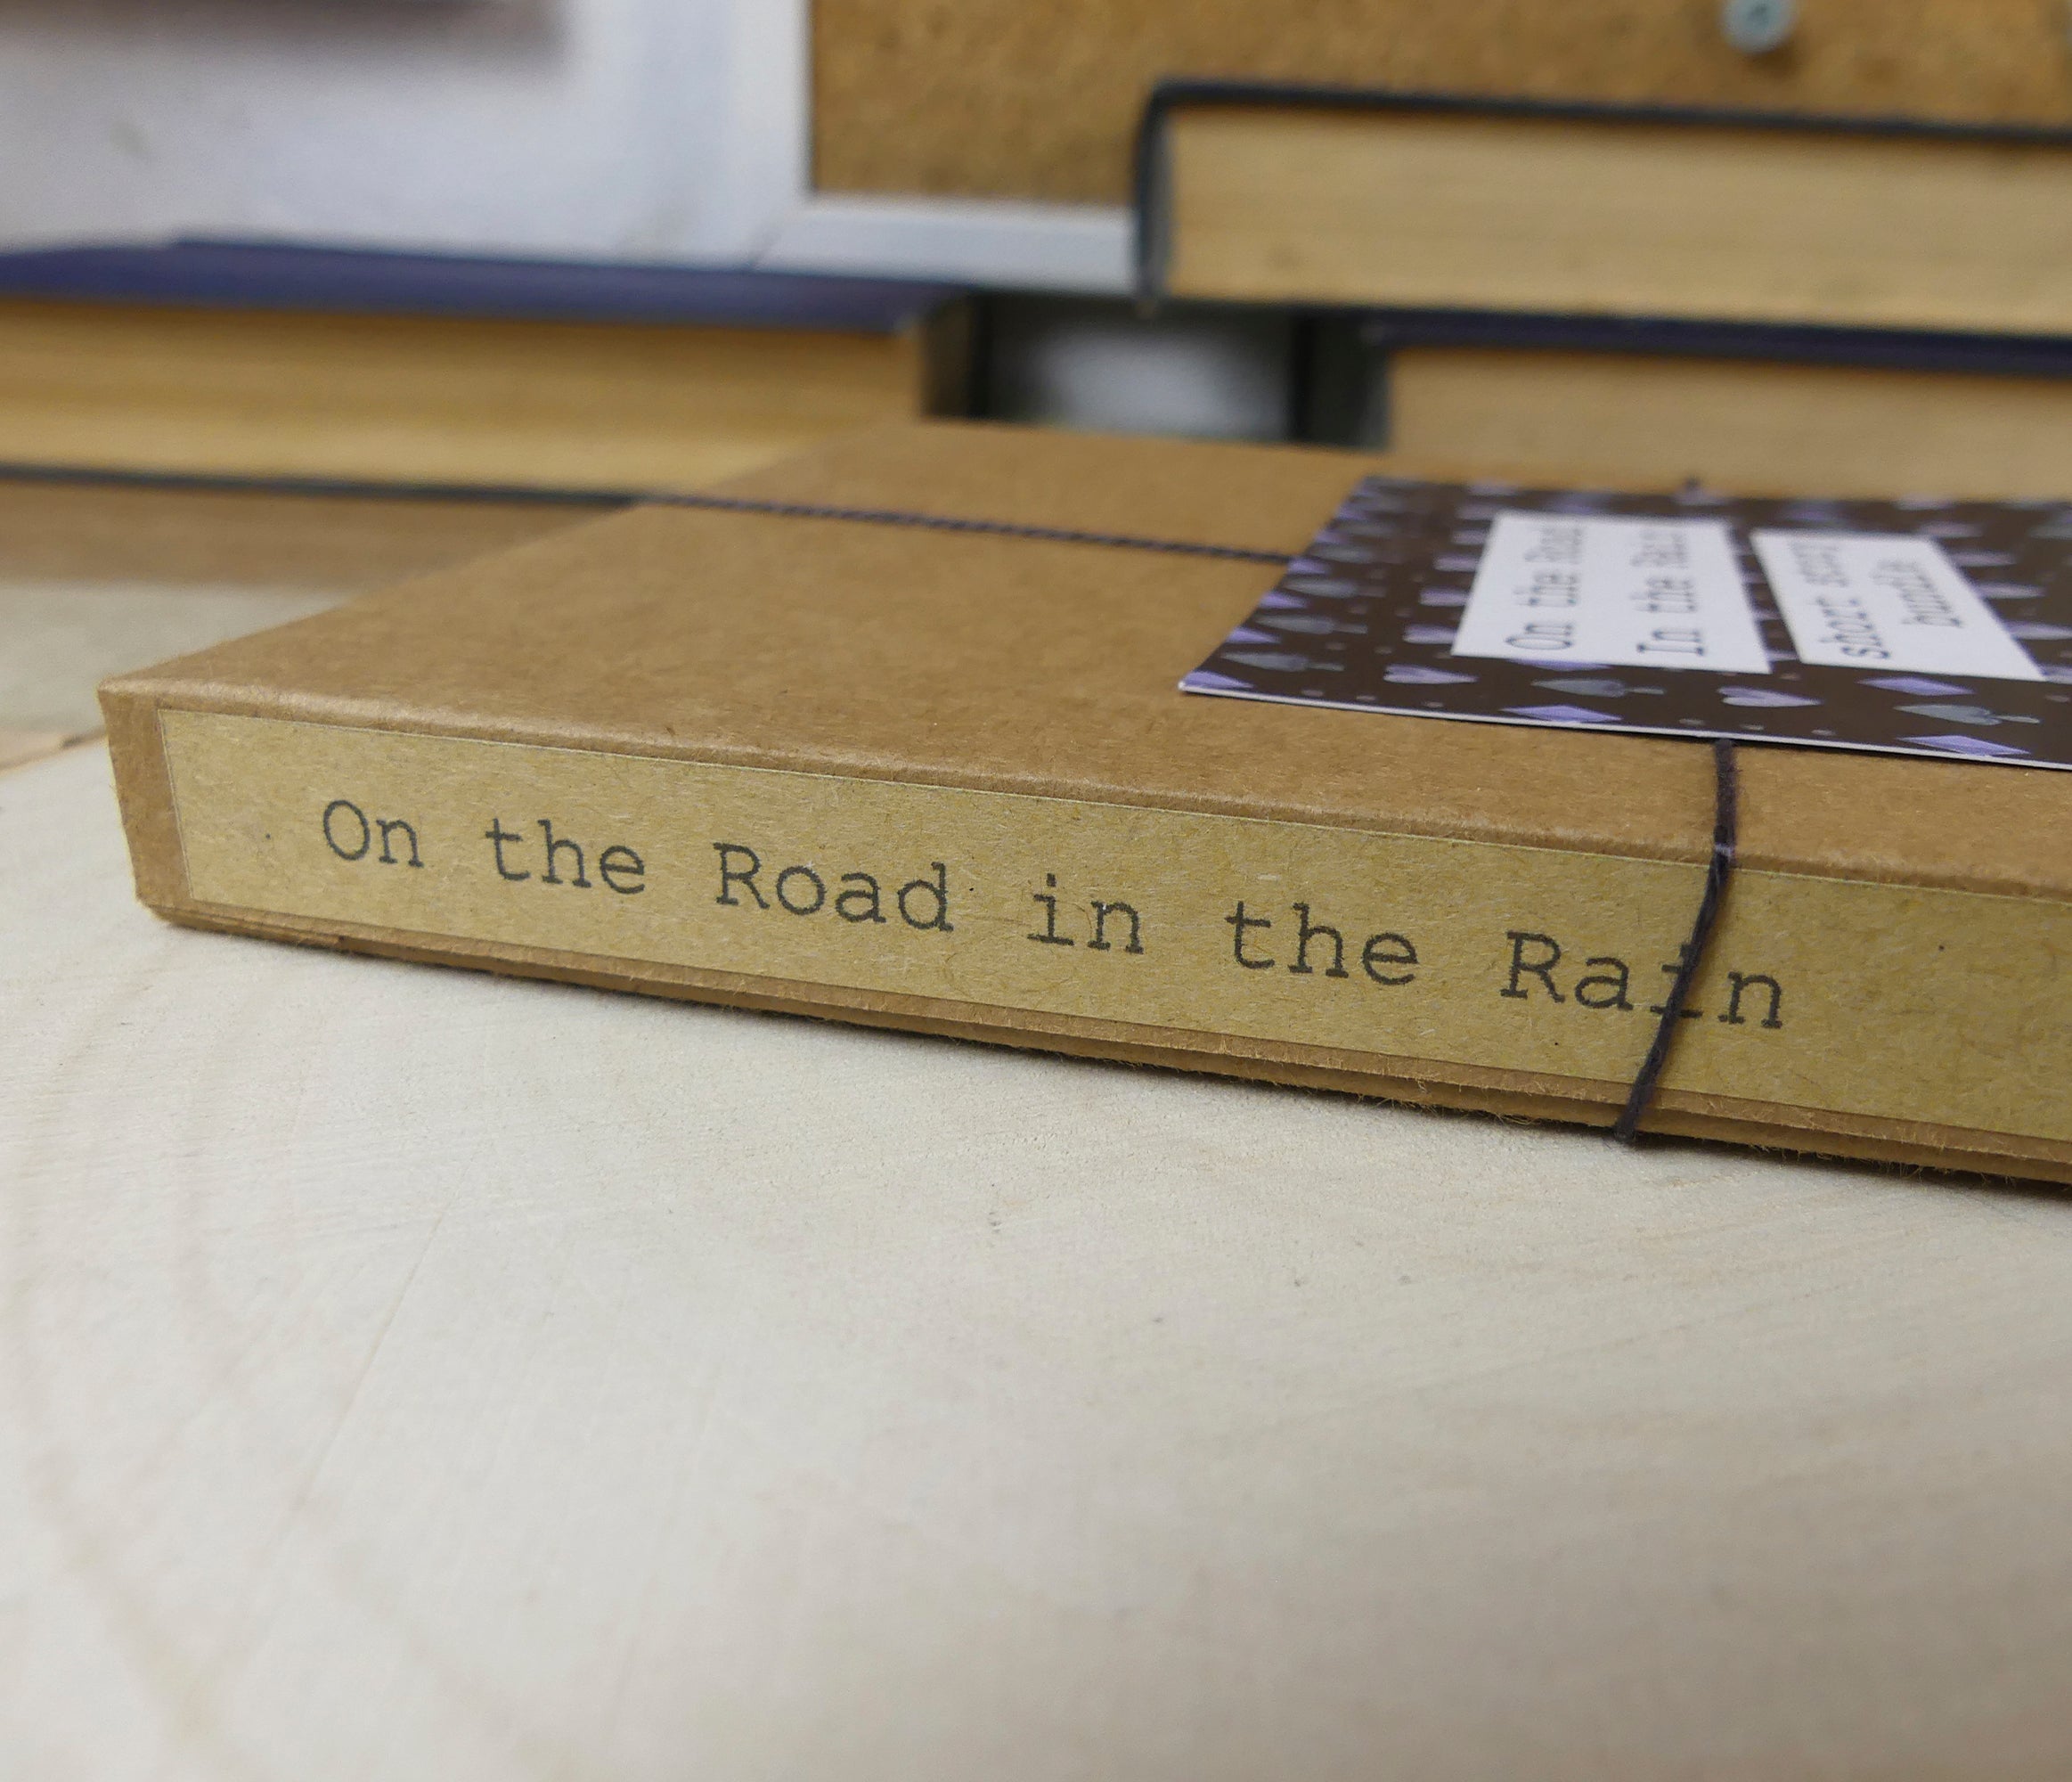 On the Road in the Rain - Short Story Zine Bundle